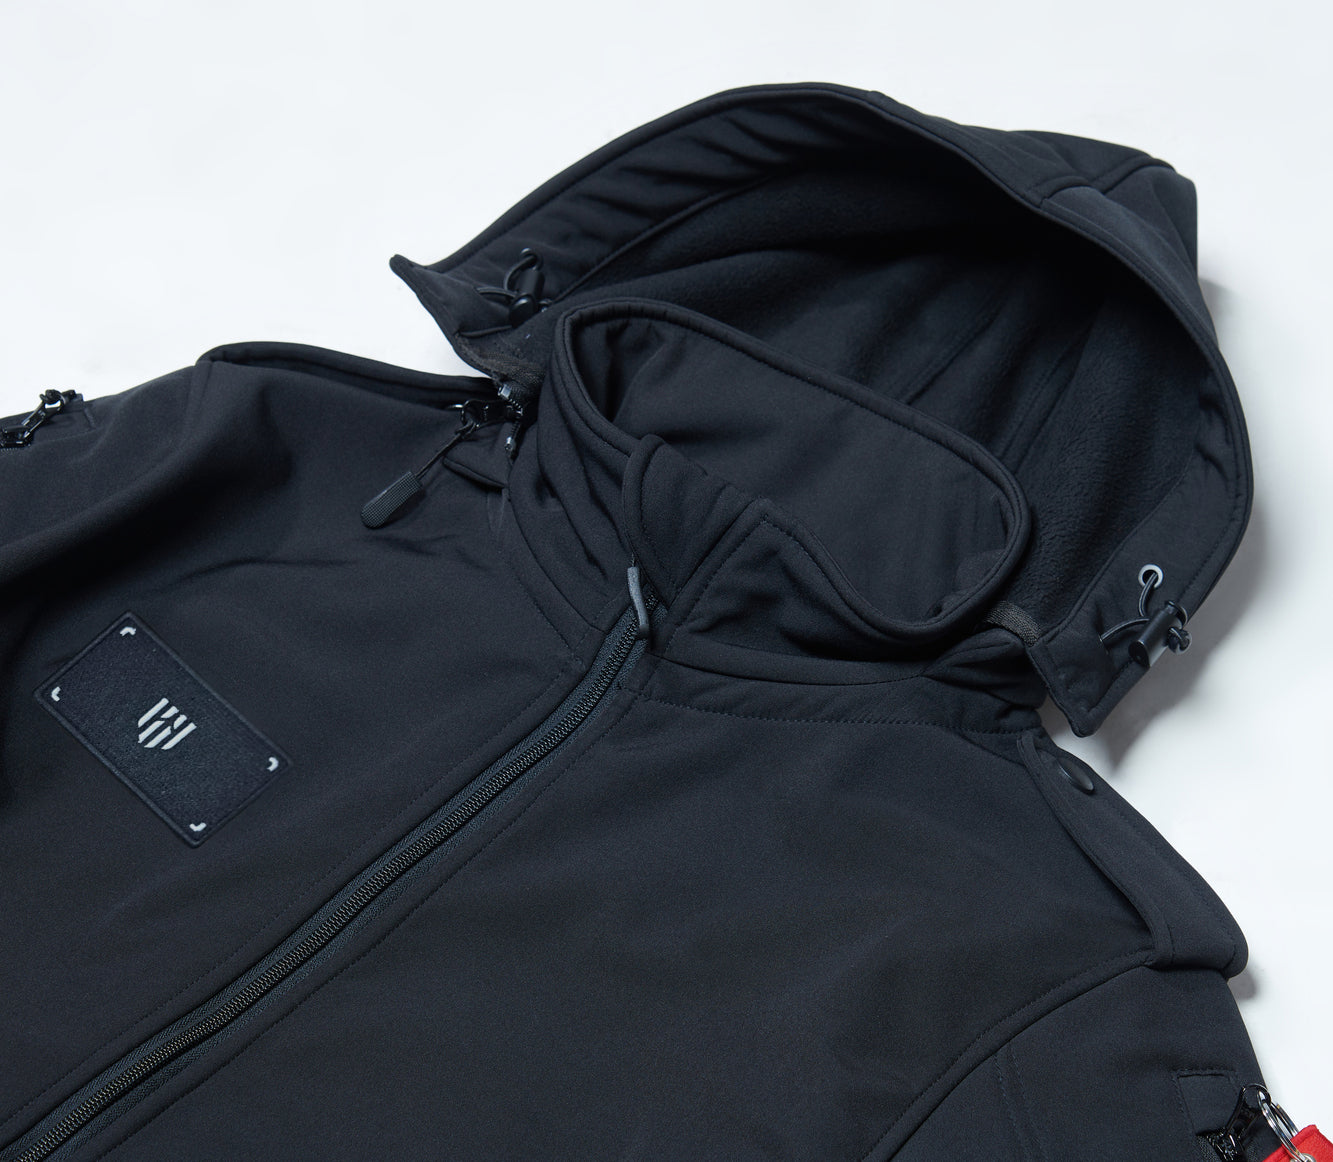 Aero Force Limited Edition Black Panther Jacket